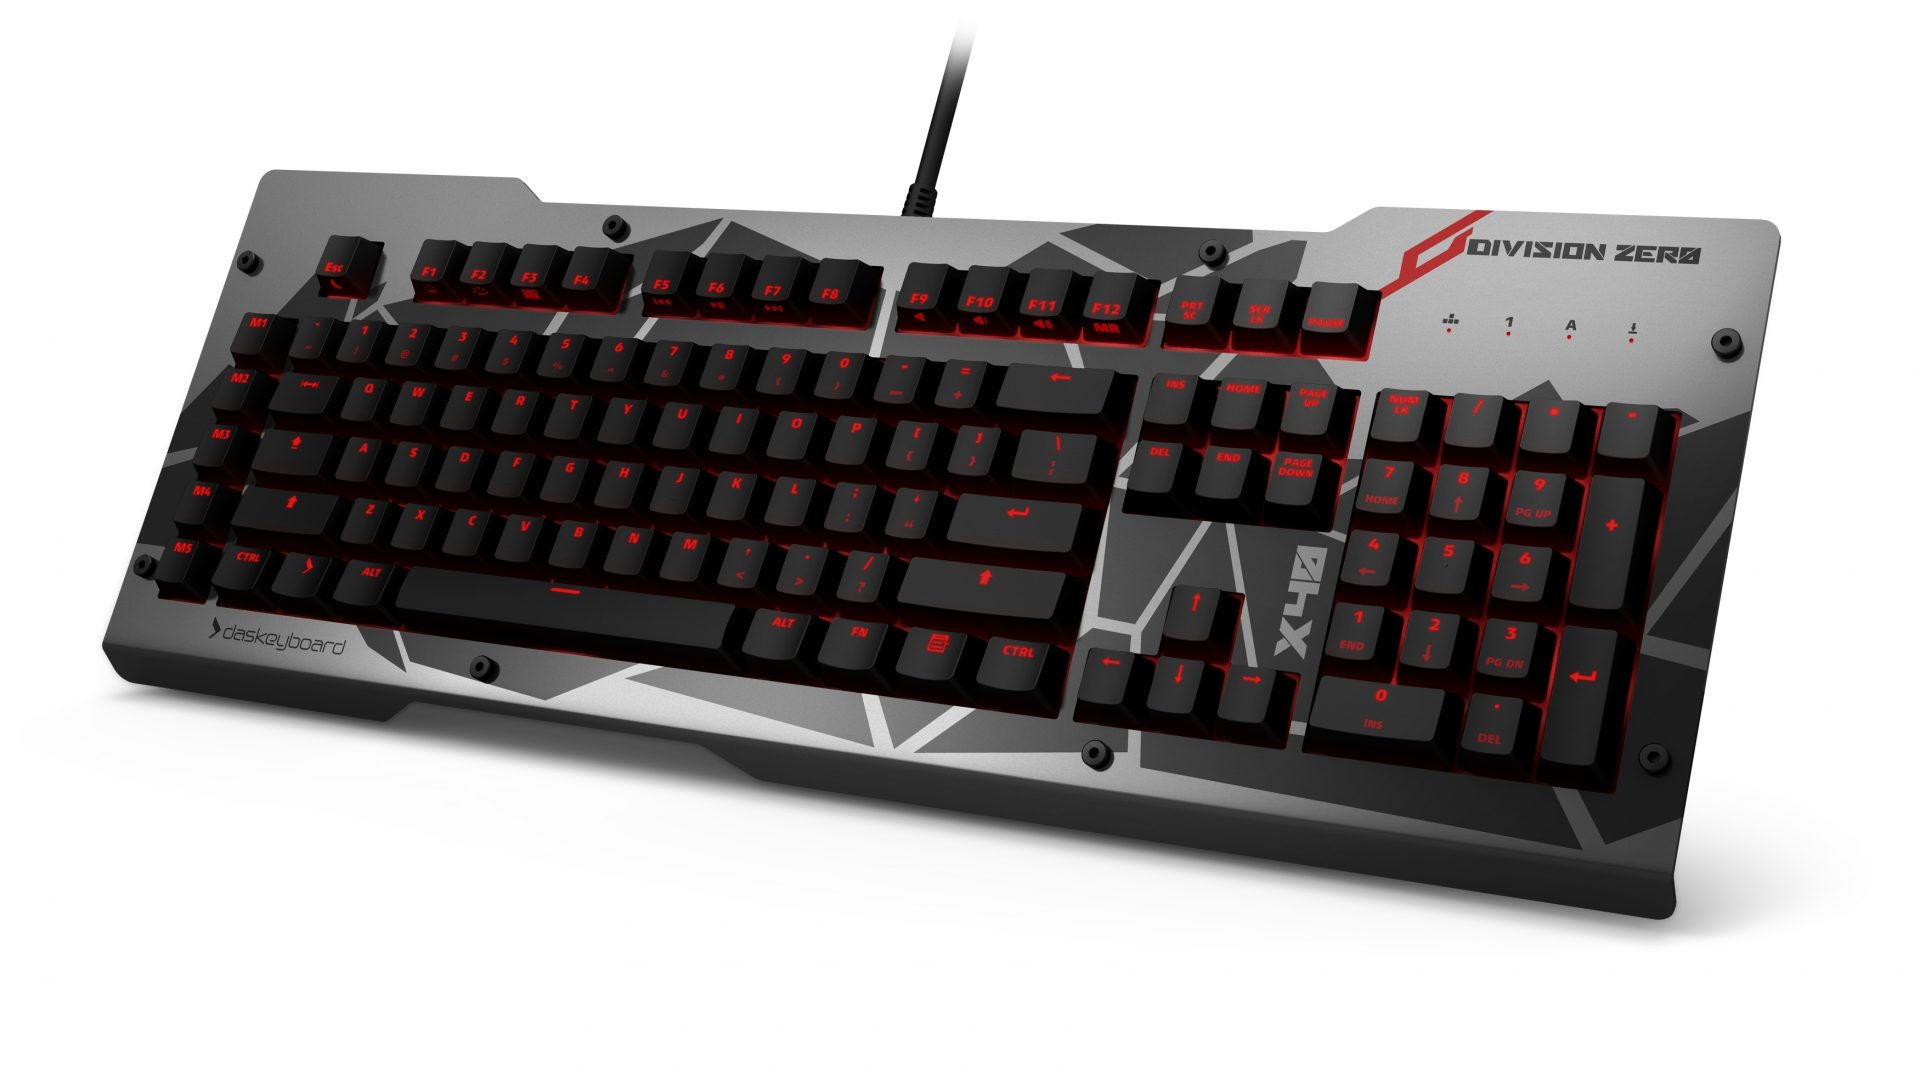 Das Keyboard Arms Gamers for Total Domination, Launches Division Zero Gaming Gear Line